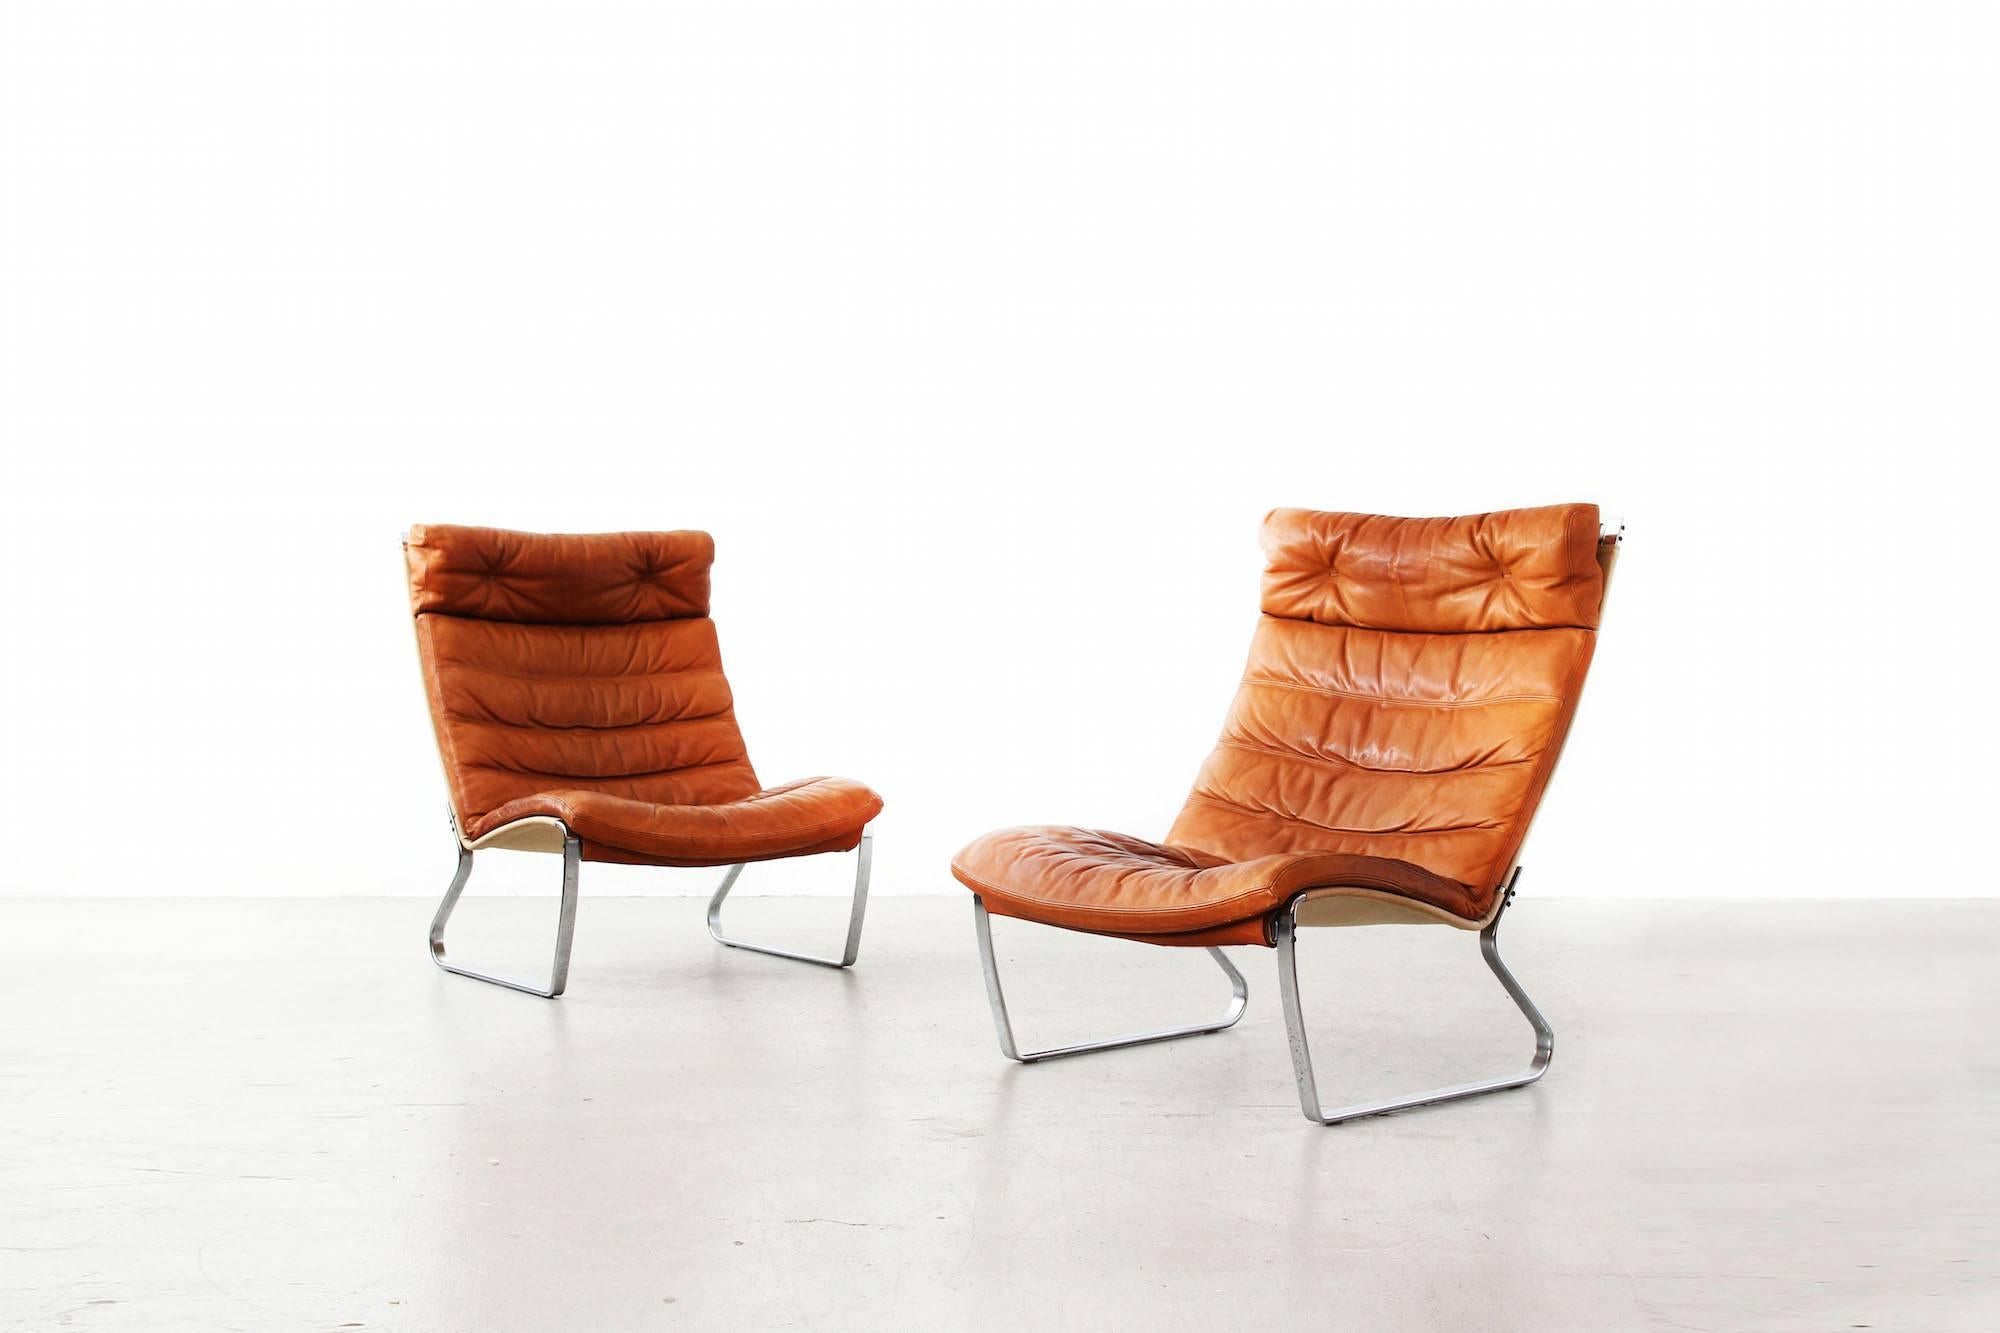 Very beautiful and rare pair of lounge chairs by Jørgen Kastholm for Kill International in the 1960s; made of steel and beautifully patinated leather in cognac-brown, very good condition.